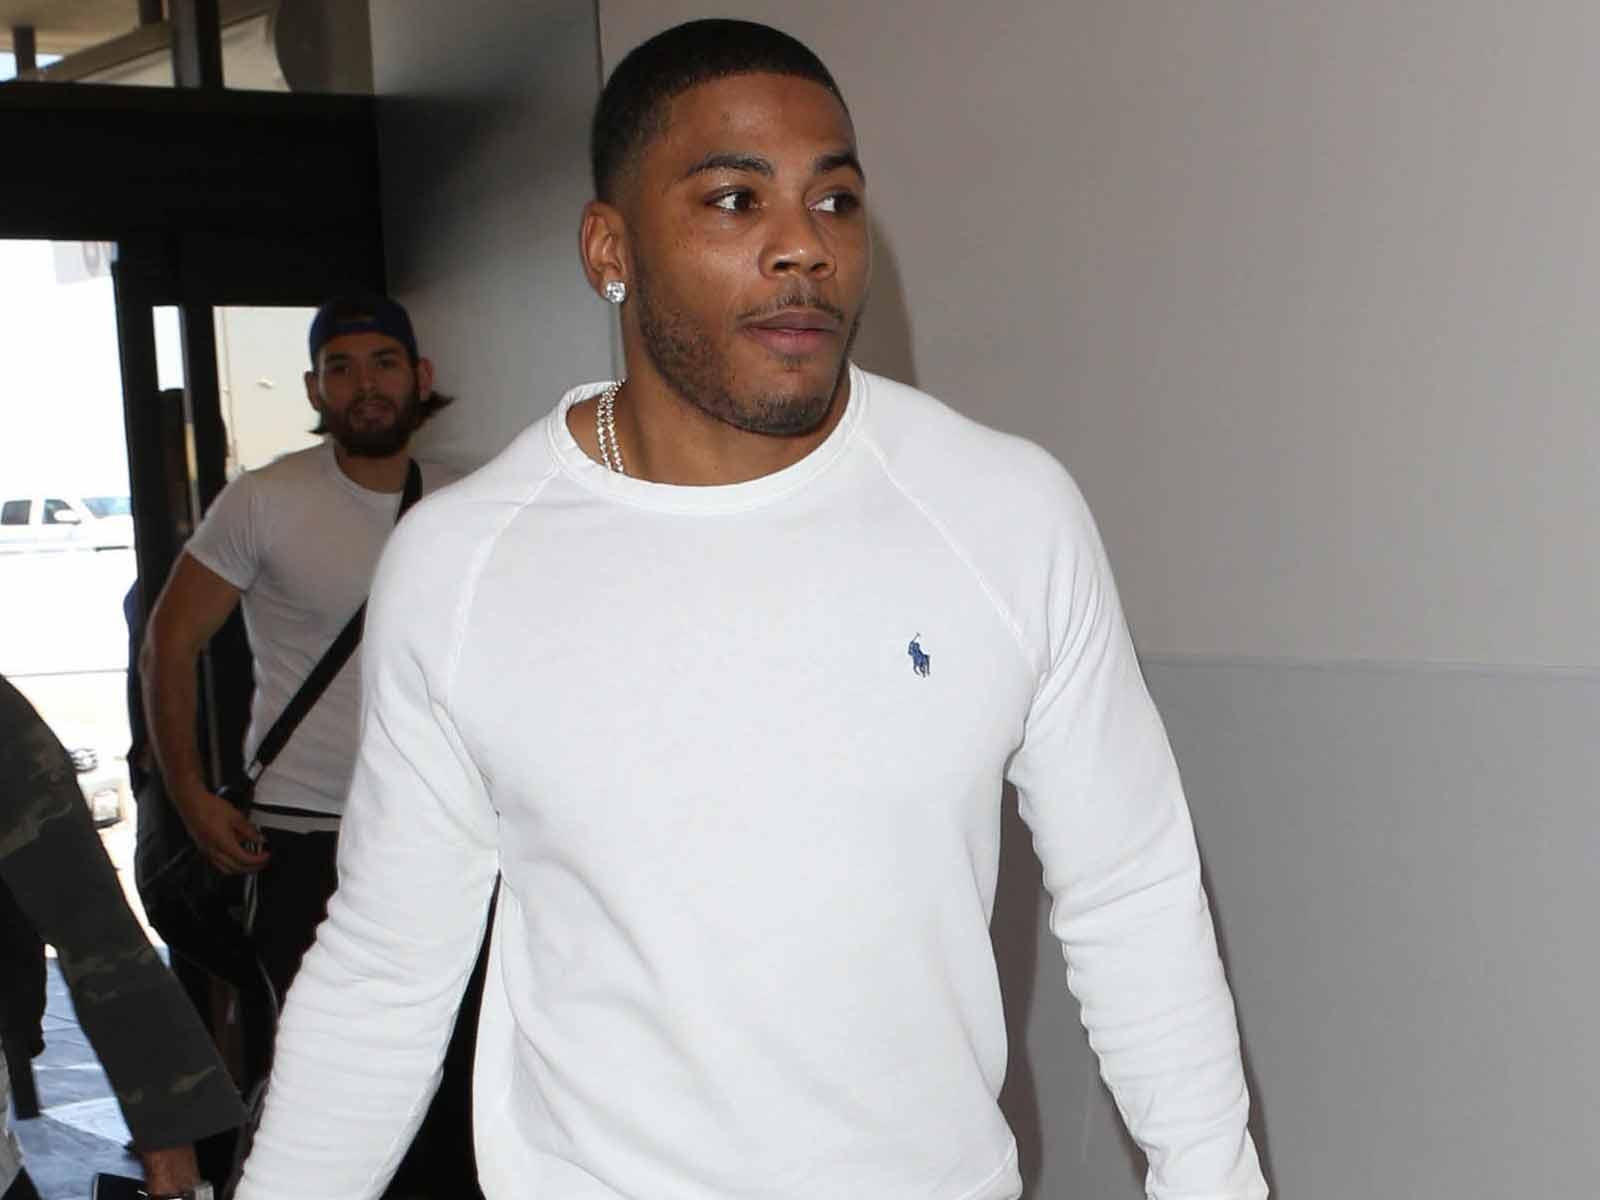 Nelly’s Rape Accuser Wants Case Closed, Won’t Testify Against Him